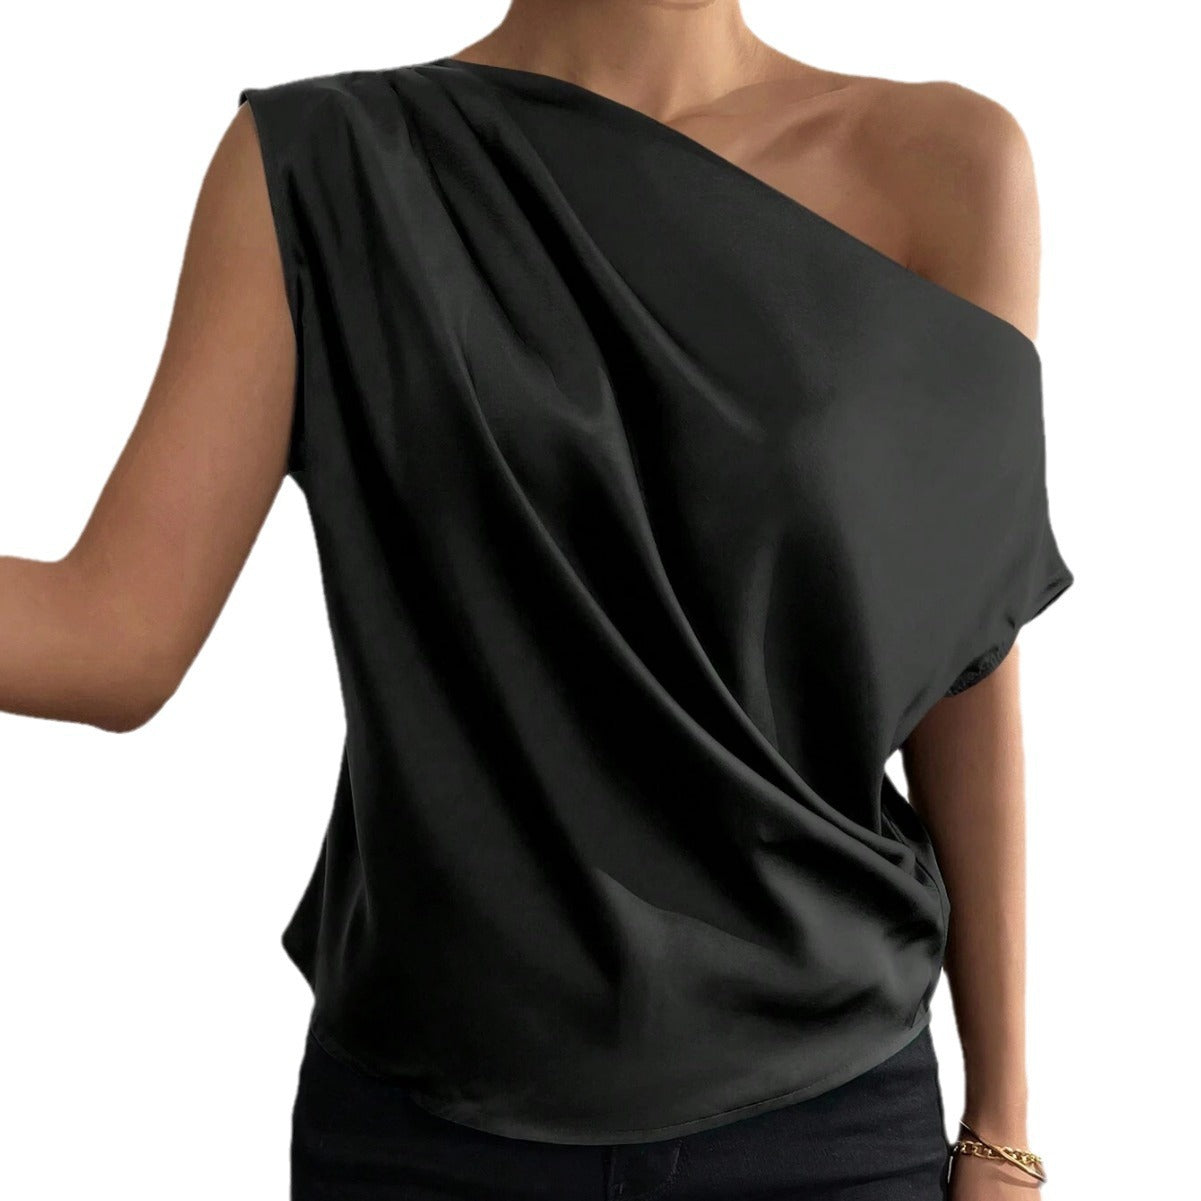 Asymmetric Vest with Diagonal Collar and Pinch Pleated Design for Women